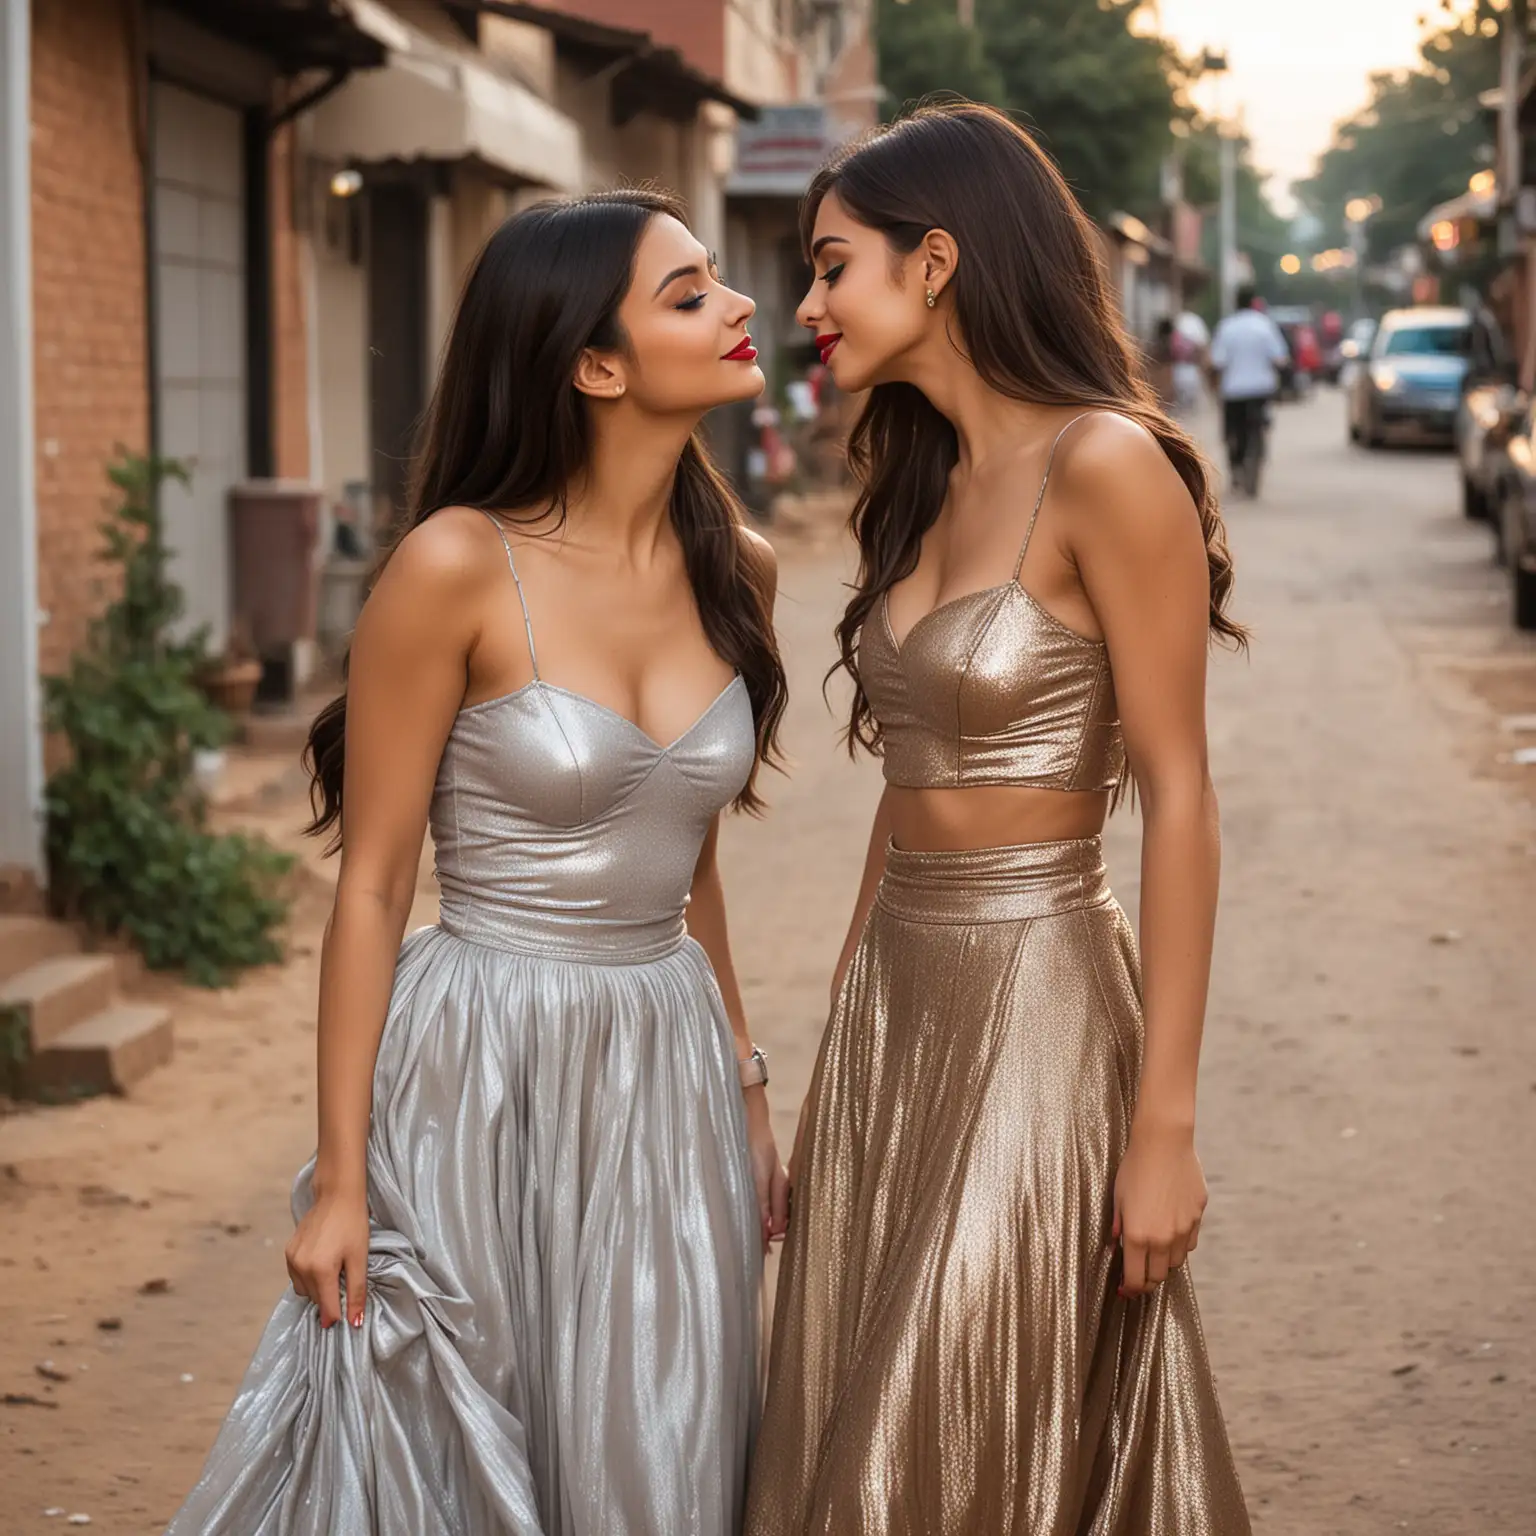 Flash photography, ISO-100 f/32 shot. Remote, poor Haryana village busy street. Victoria Justice, Madison Reed & Ariana Grande wearing shiny slinky flowy silky chiffon satiny metallic skirts, red glossy lipstick & lots of makeup and pouty lips. kissing romantically.